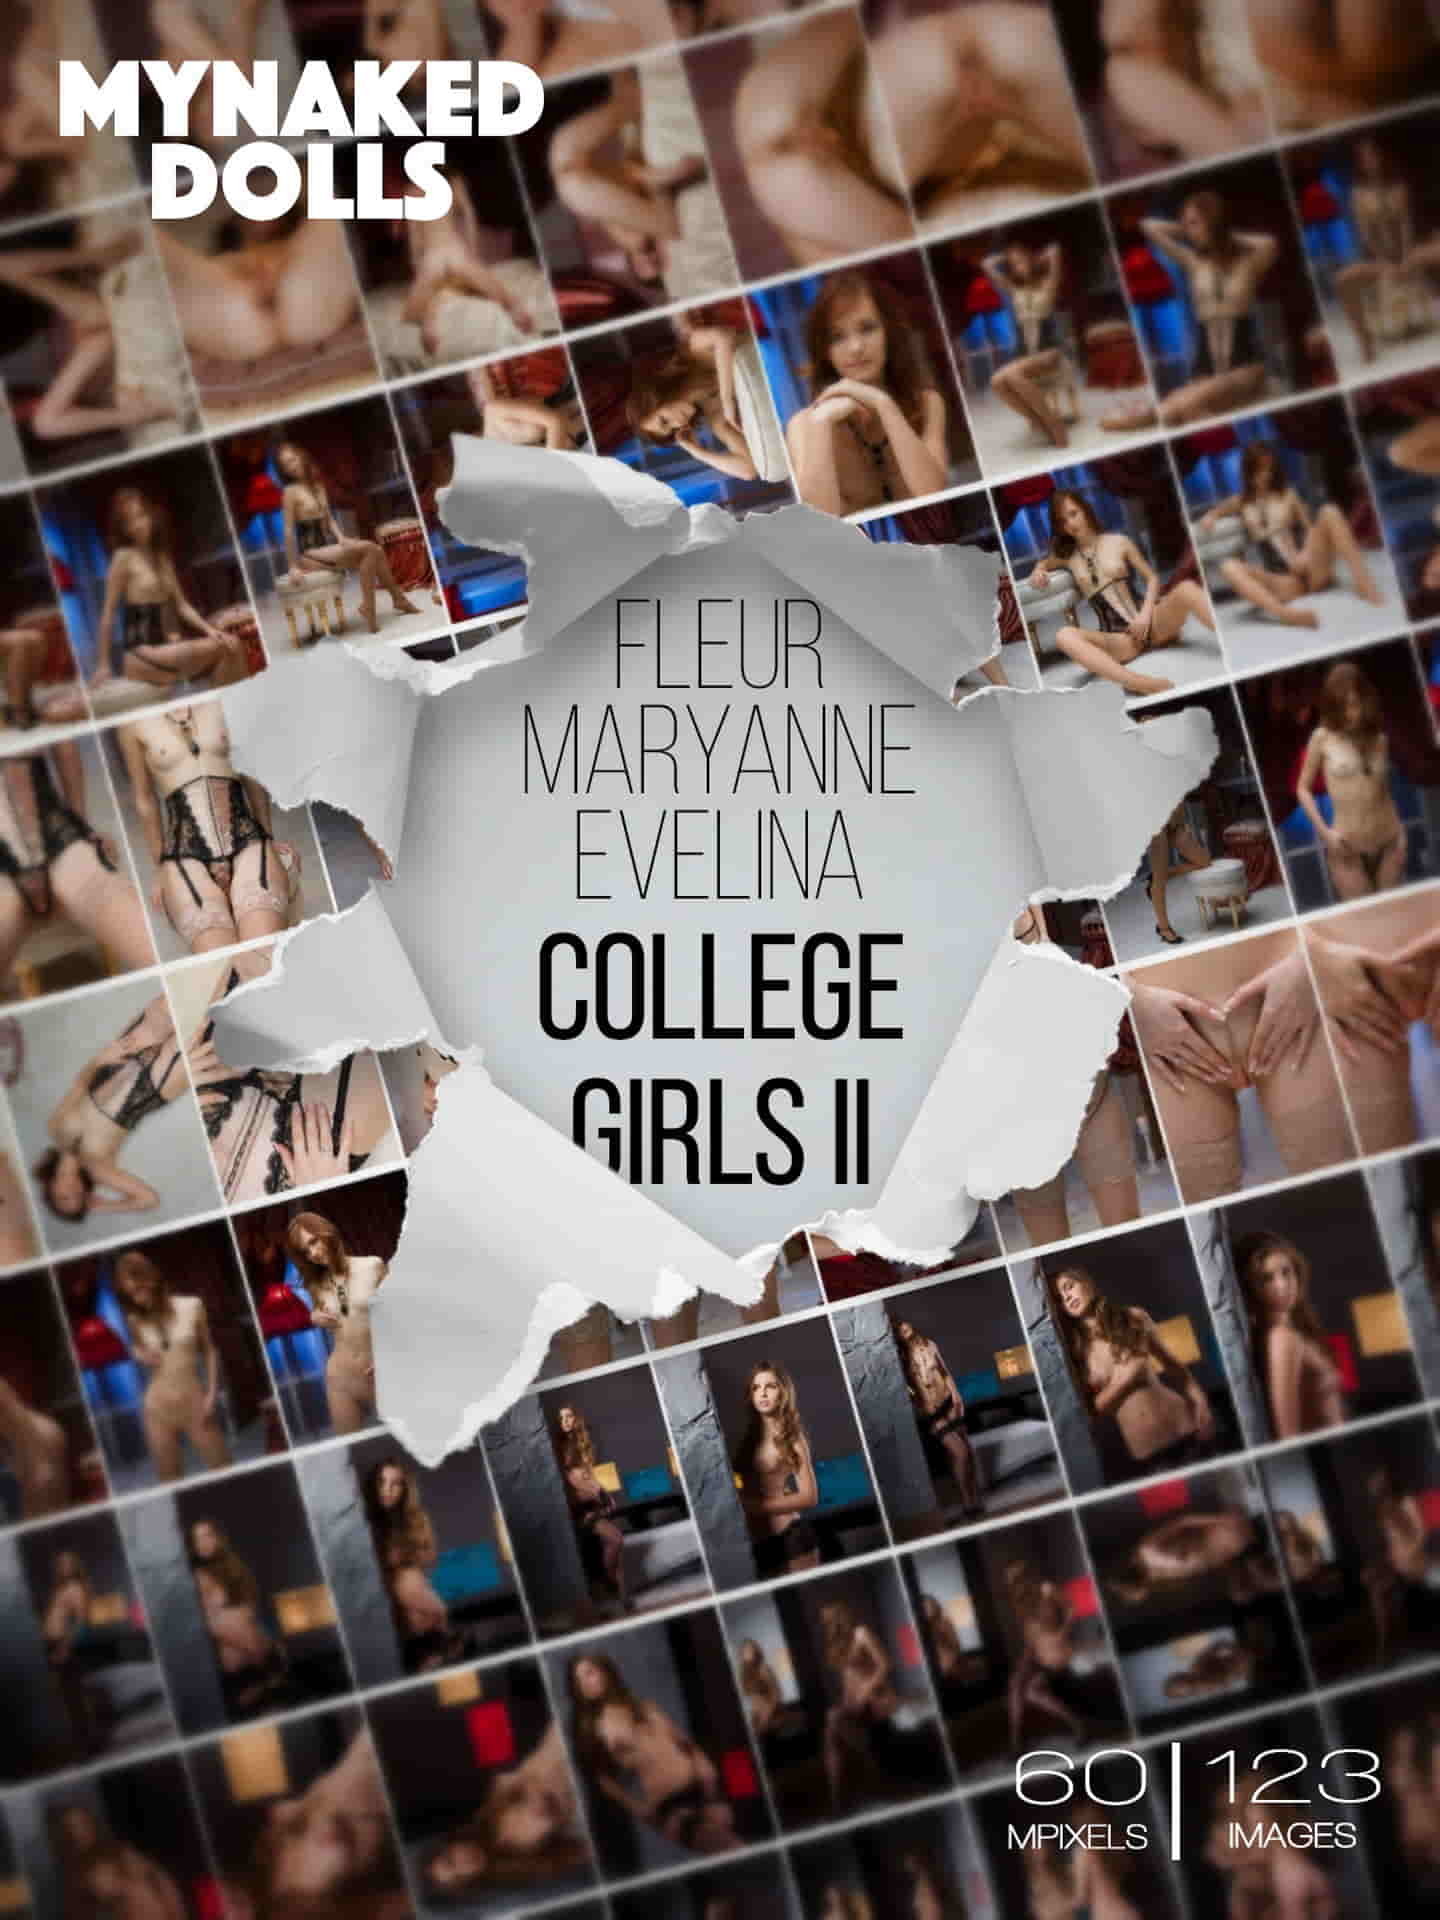 The life of a college girl - Fleur Maryanne Evelina - Spicy mix College girls